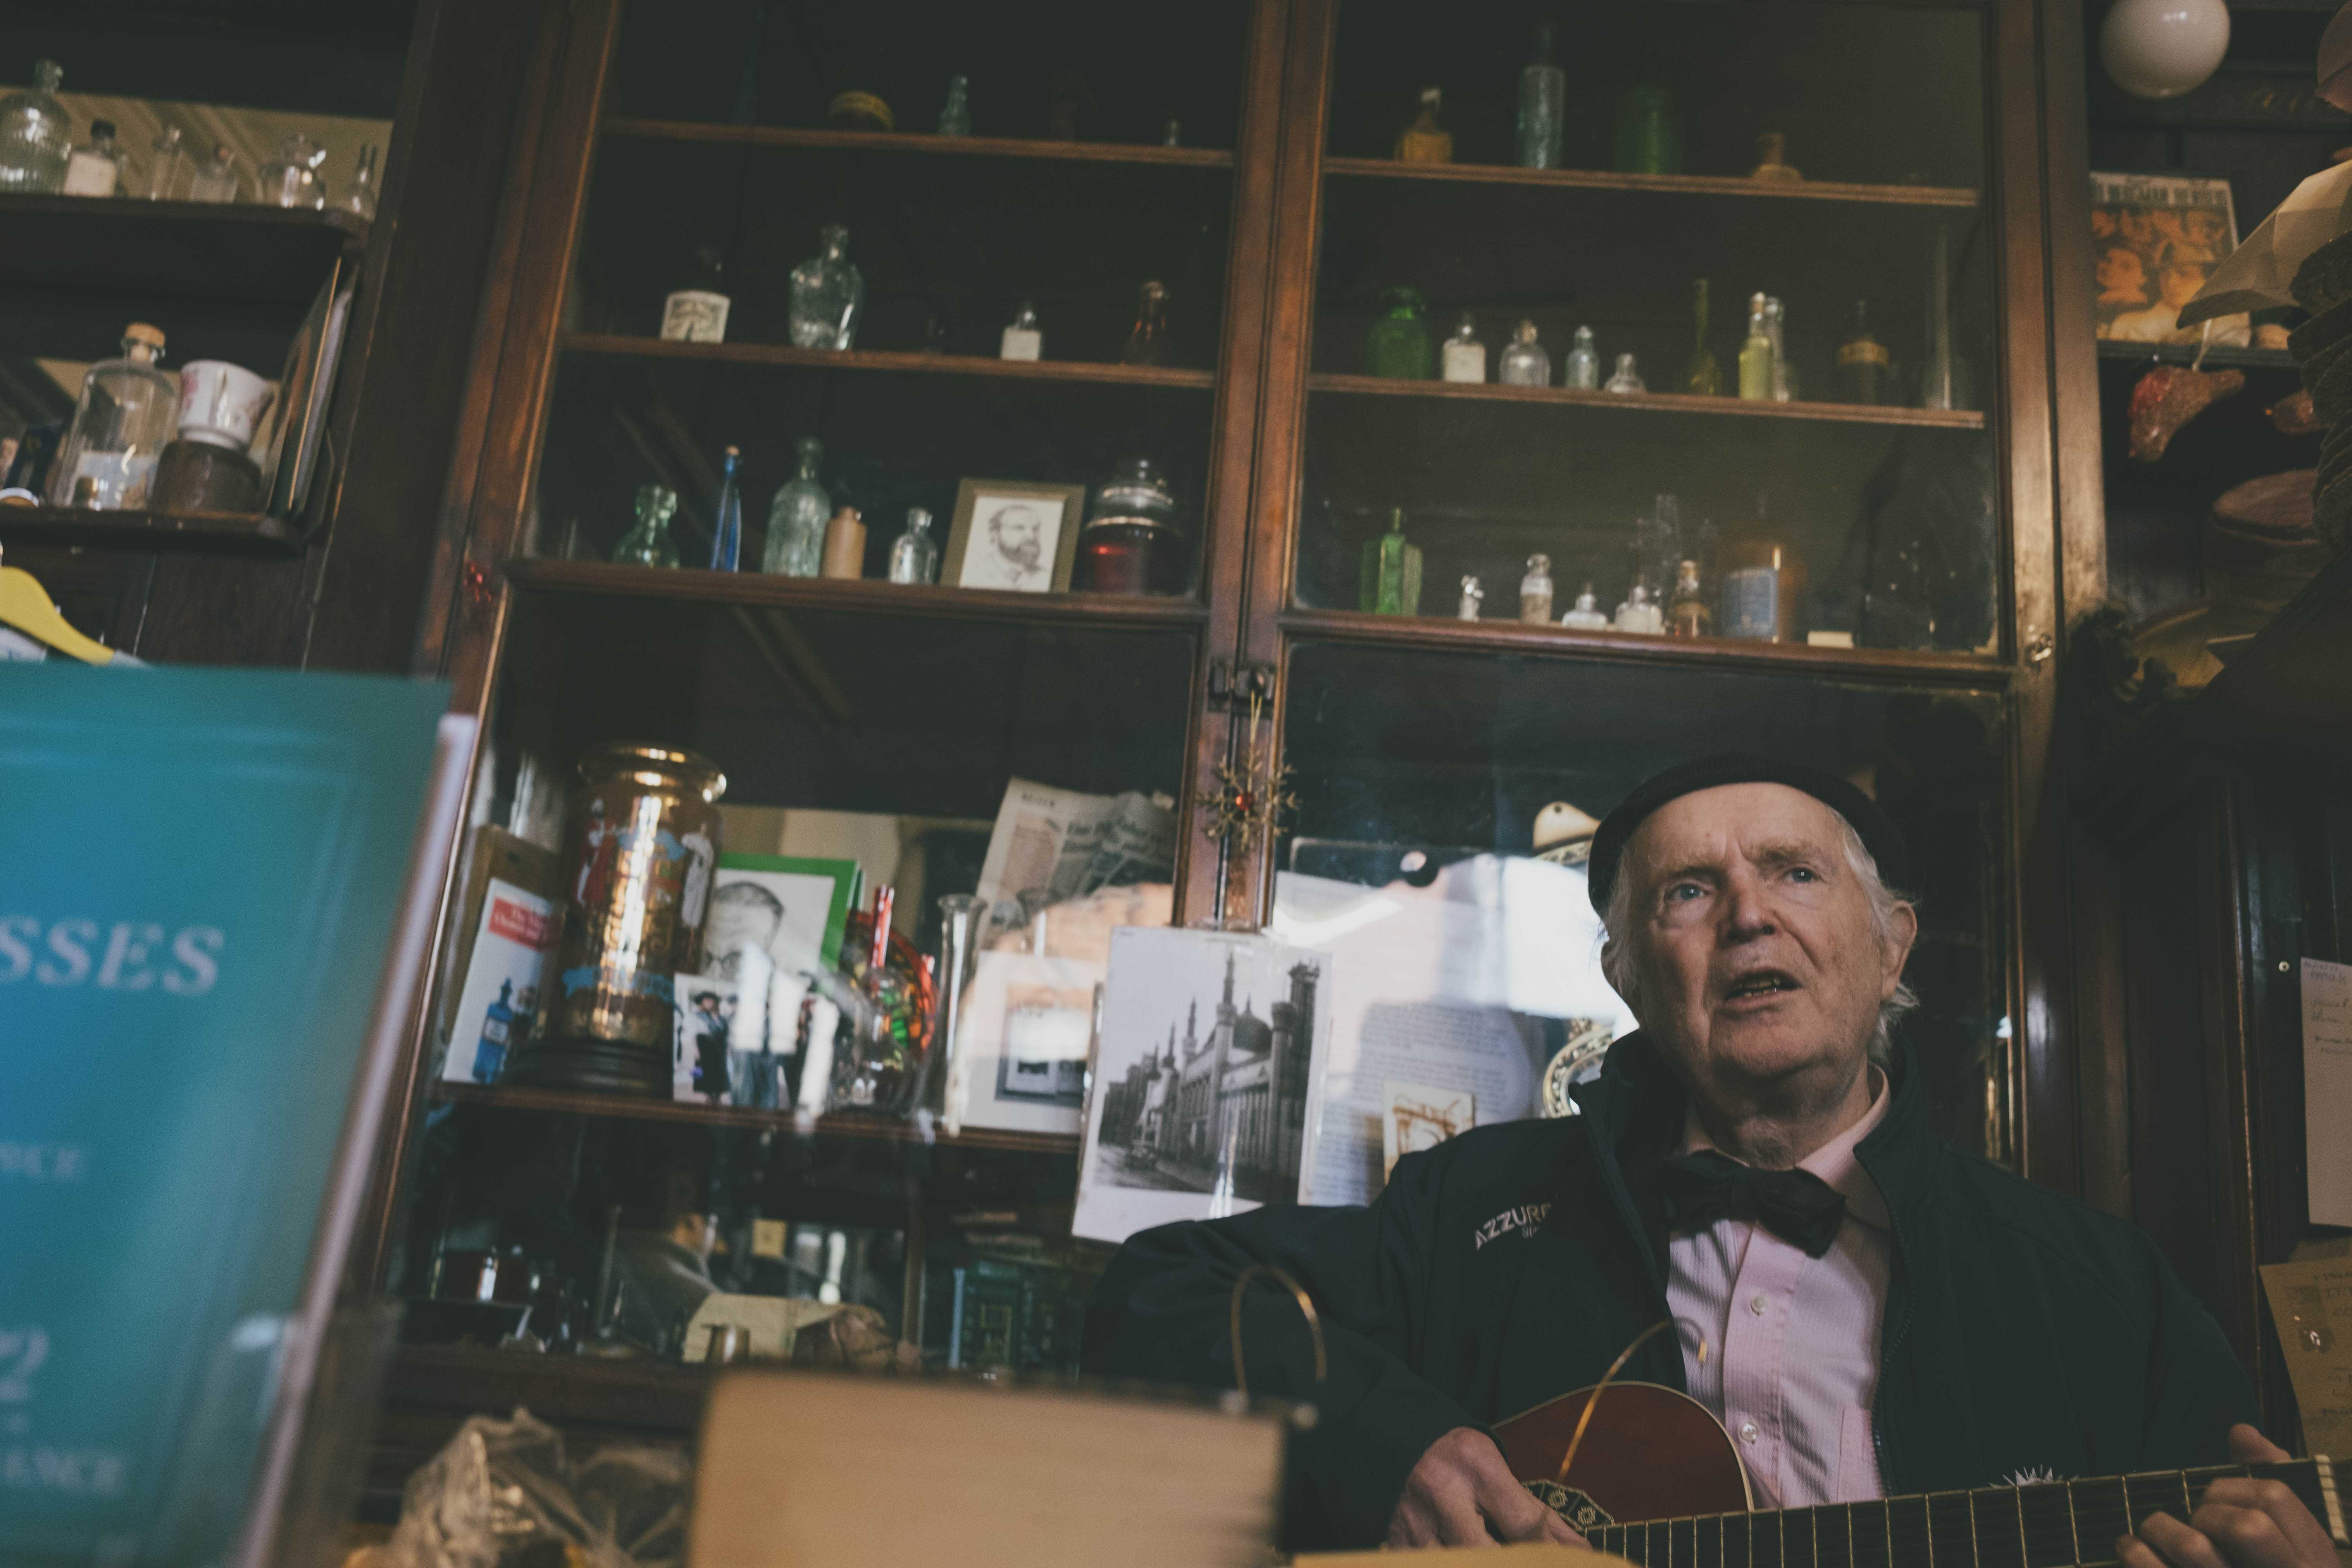 Sweny's proprietor playing his guitar and singing with old medicine bottles on a shelf behind him